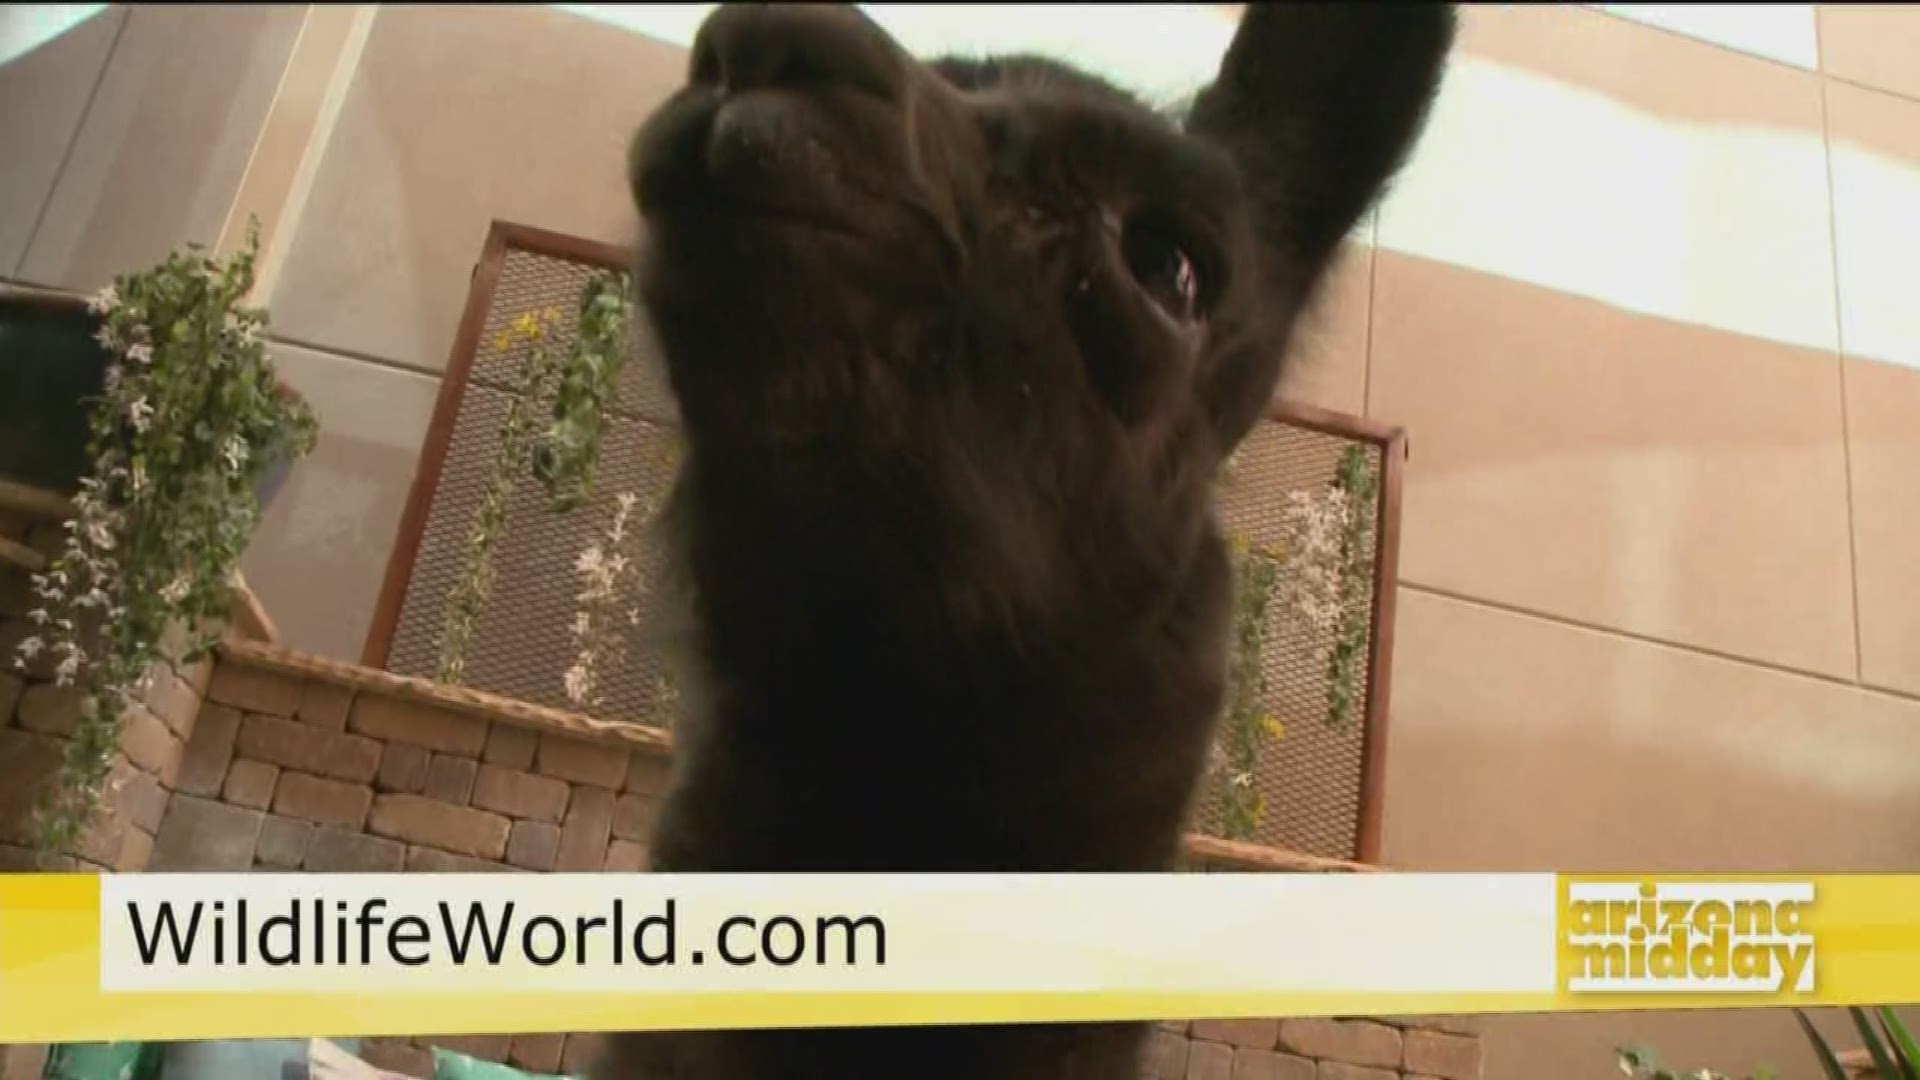 Groove's friend from the Wildlife World Zoo Aquarium, and Safari Park pays us a special visit. Kristy Morcom tells us how we can meet Espresso the Llama at the zoo